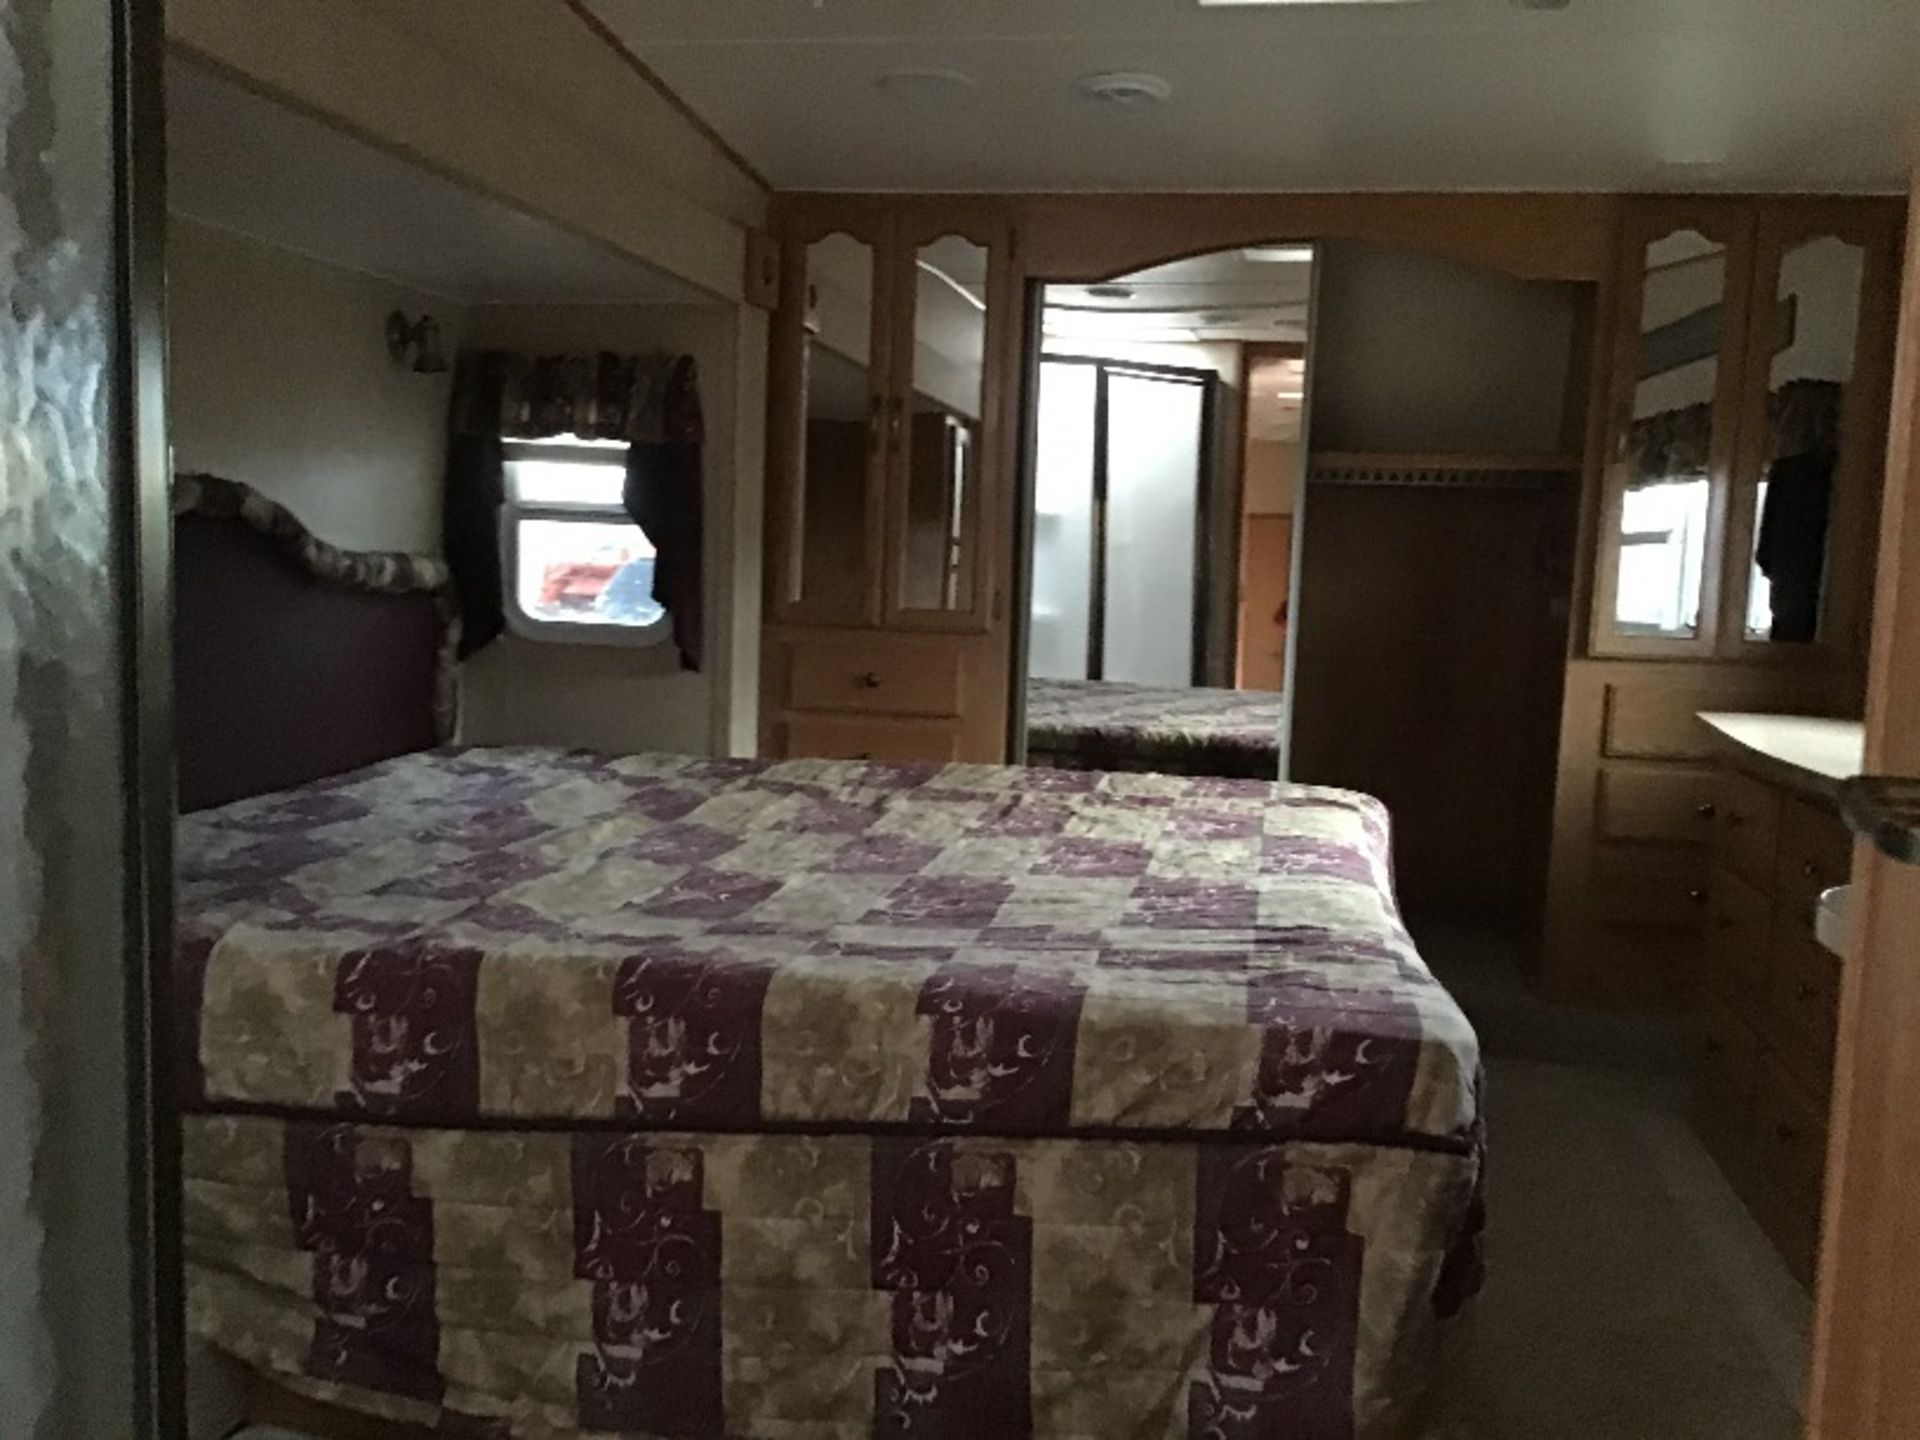 2007 Sandpiper F315 by Forest River 5th Wheel Holiday Trailer - Image 22 of 29